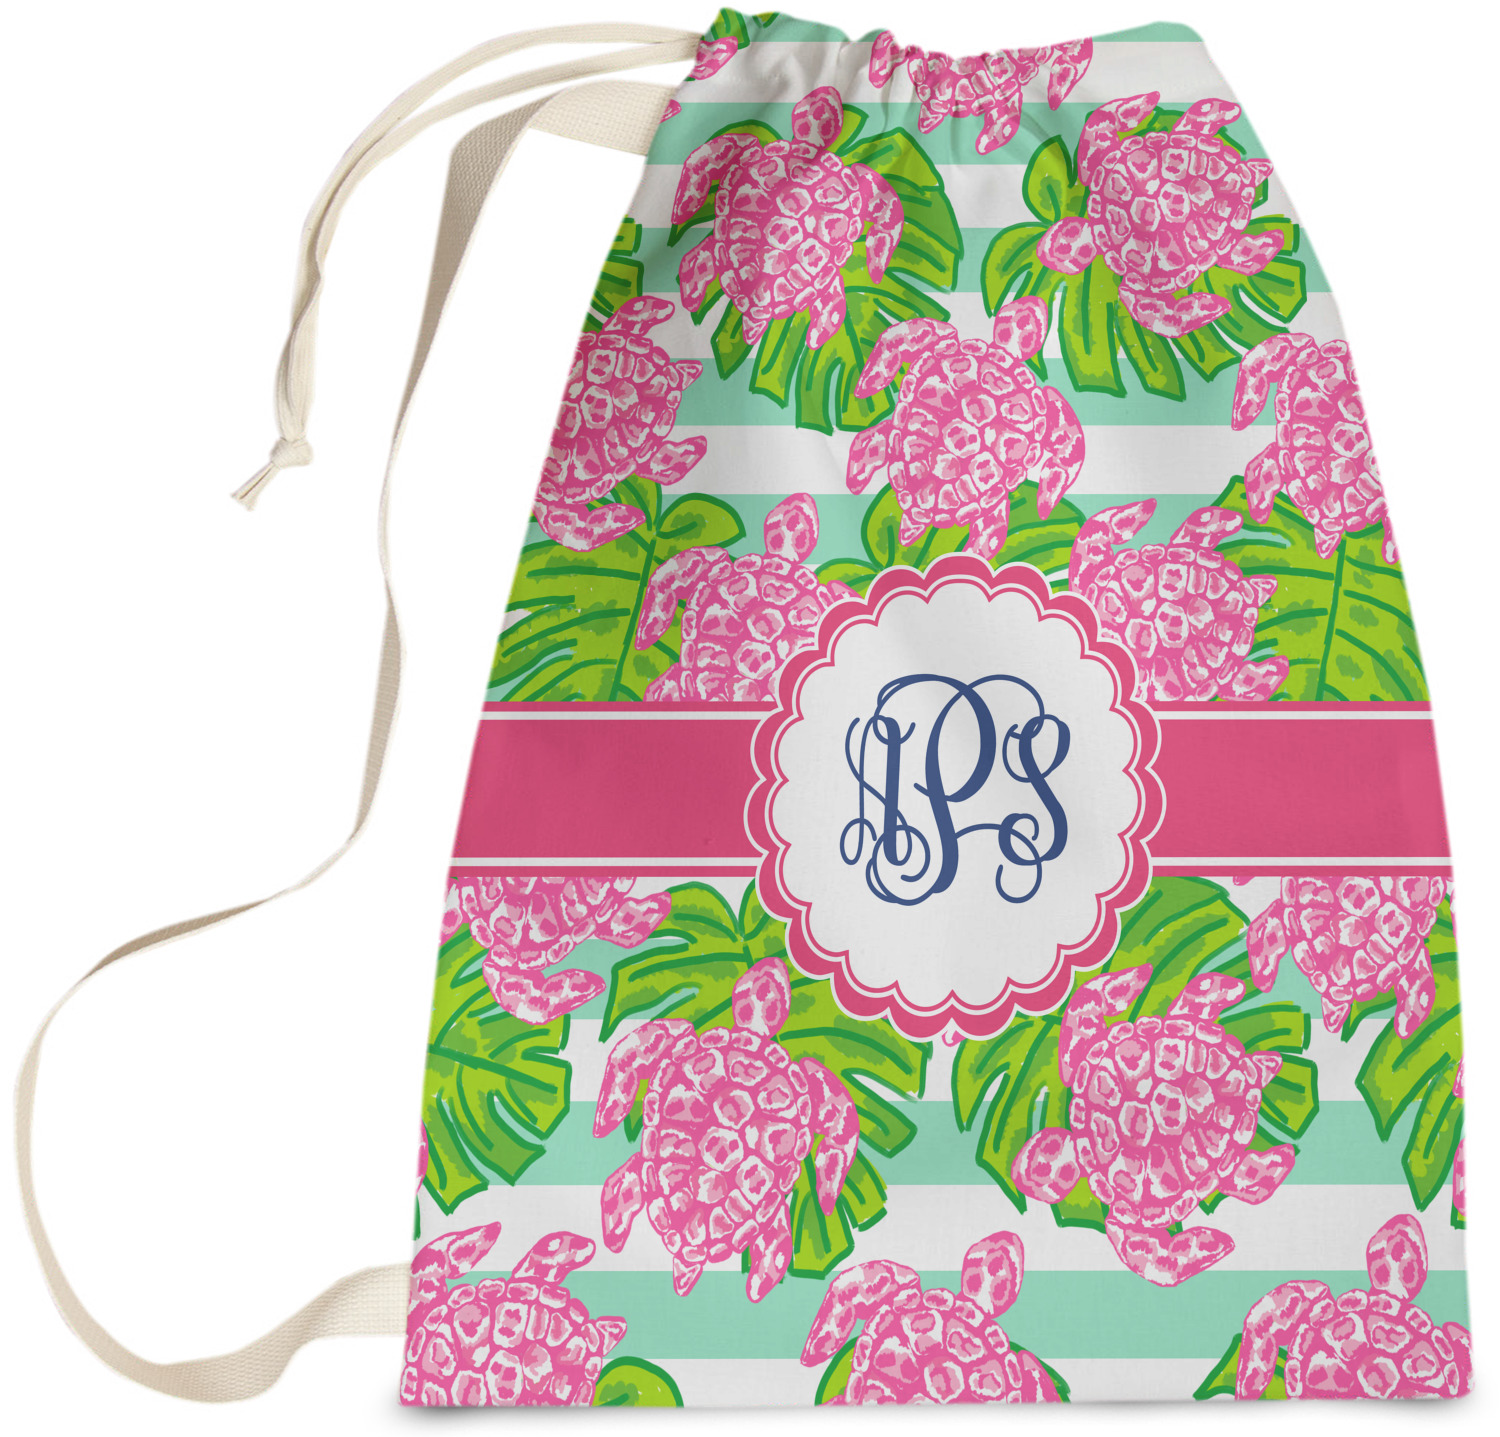 Personalized Laundry Bag  Preppy Monogrammed Gifts